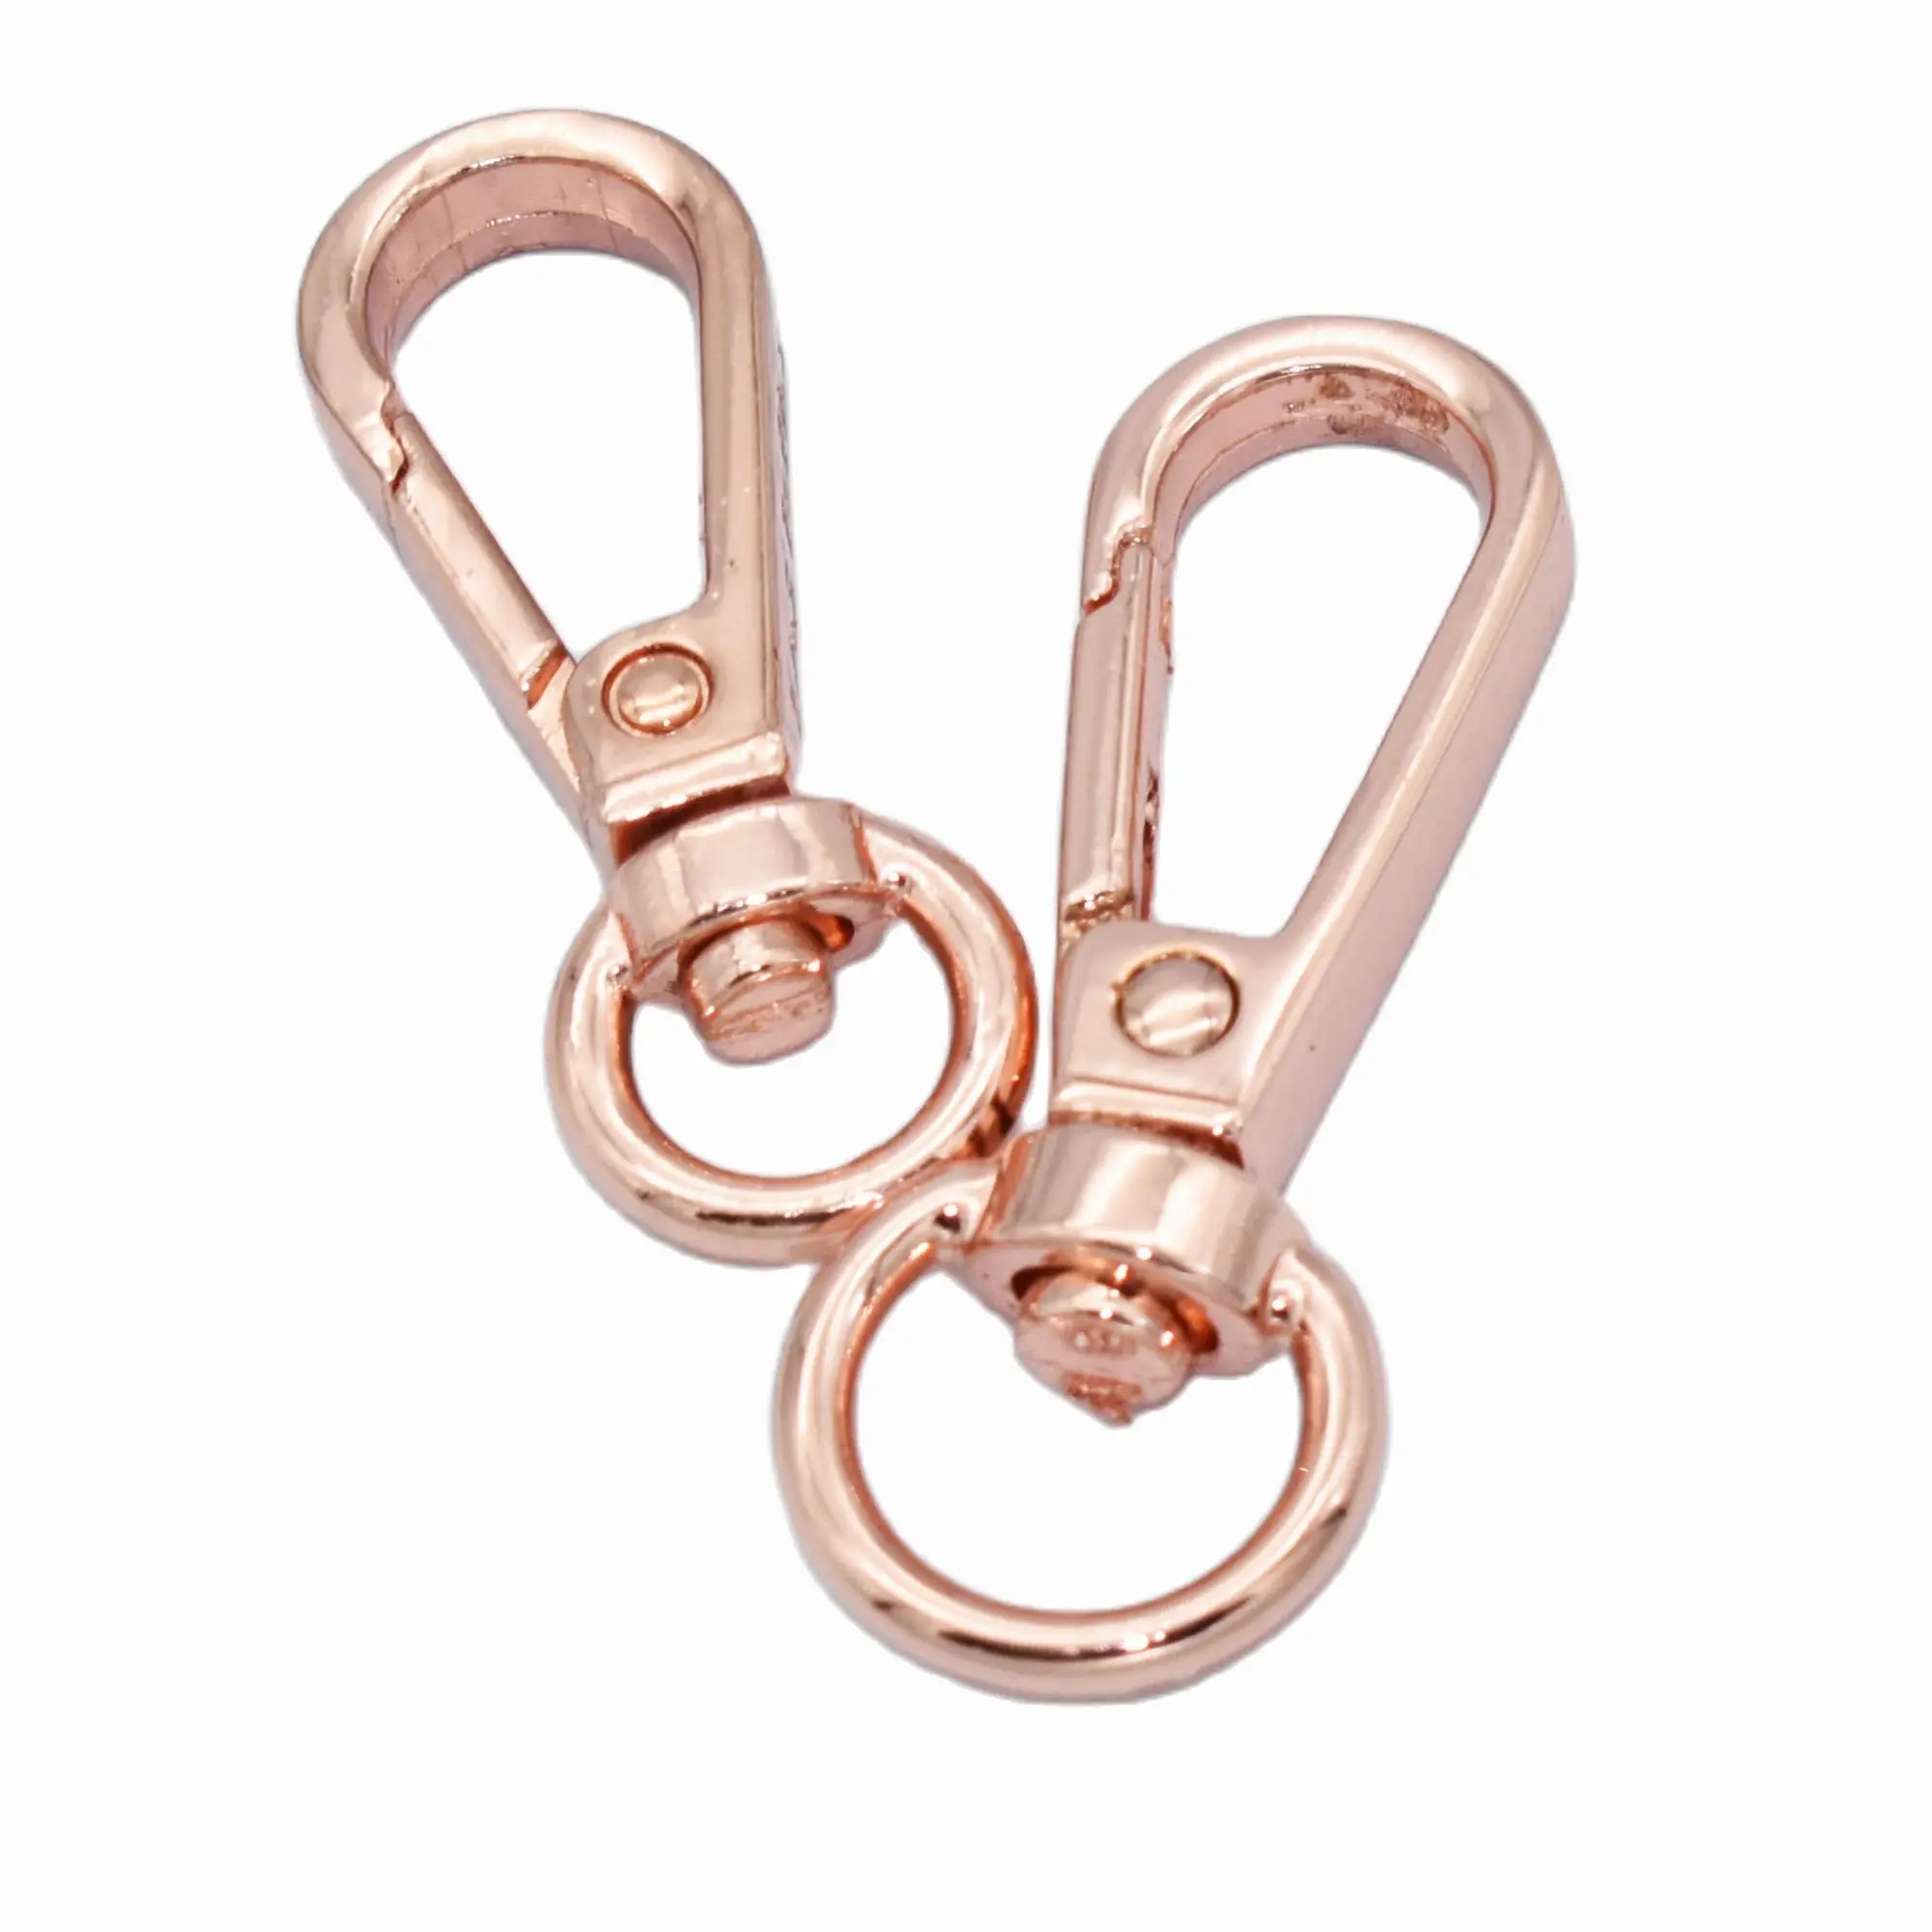 

Rose Gold Swivel Clasps Lobster Claw Clasp Snap Hook Keychains Base Lanyards Keys Clips Bag Key Ring Strap Webbing Clip 6 pcs